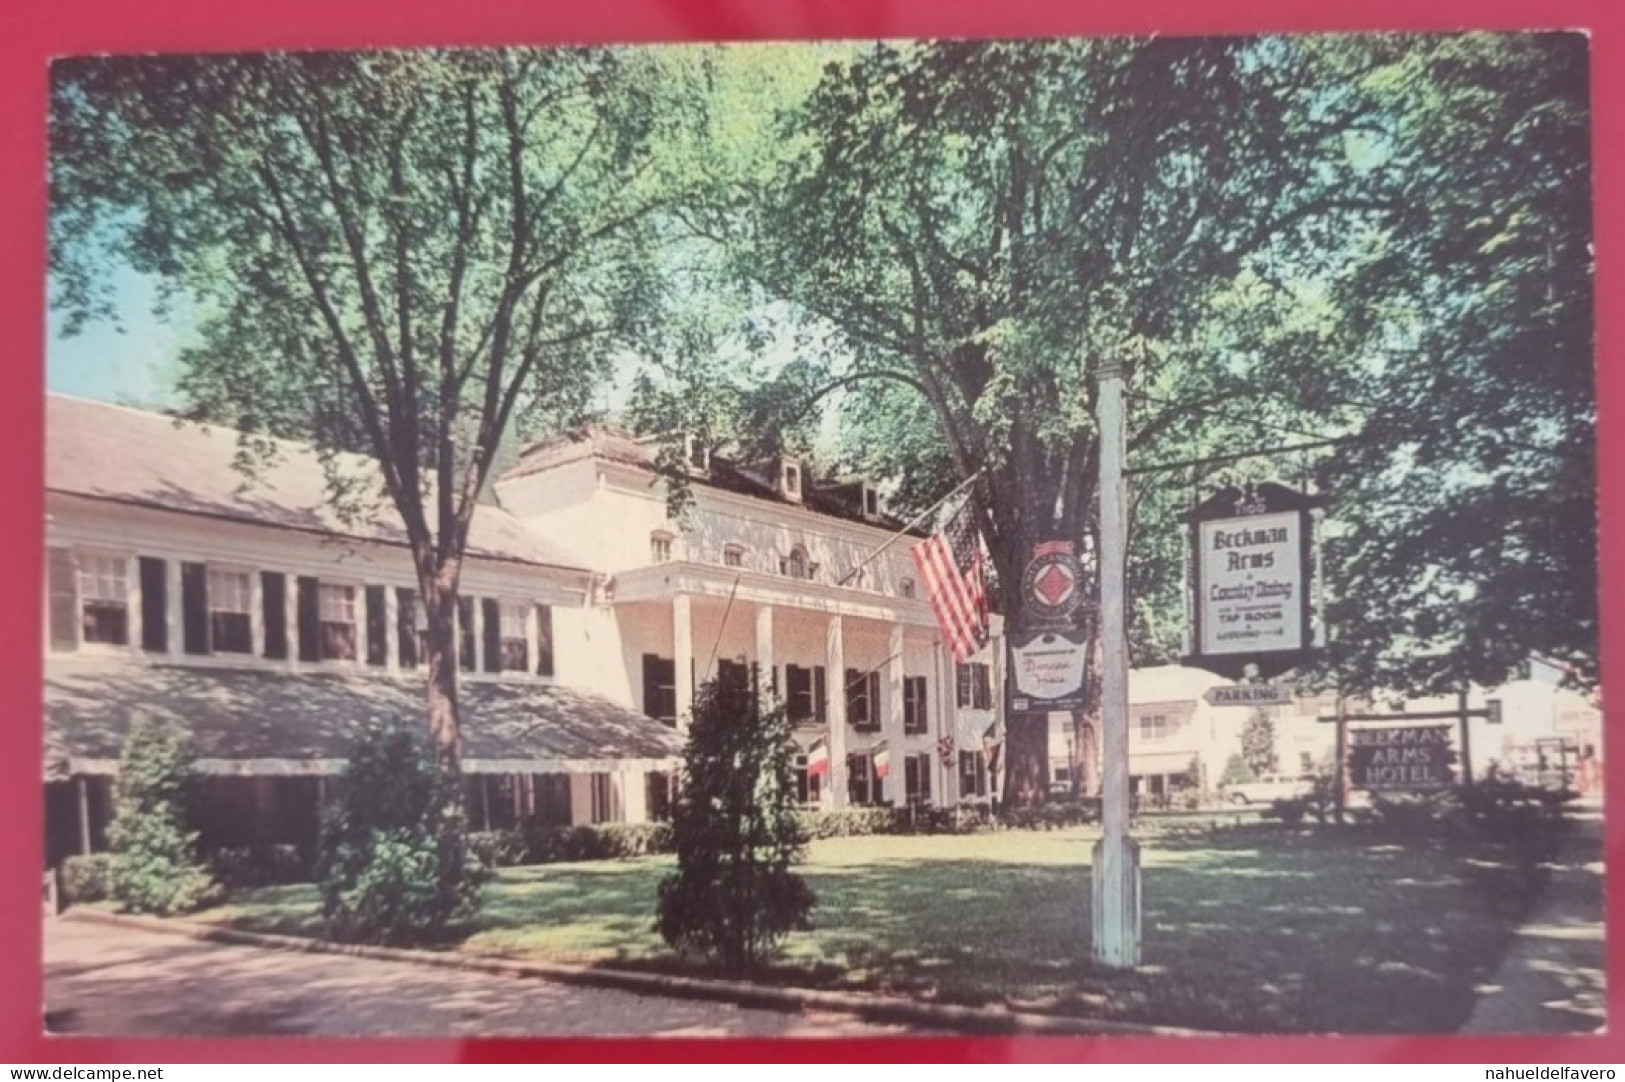 Uncirculated Postcard - USA - NY, NEW YORK - BEEKMAN ARMS, OLDEST HOTEL IN AMERICA, RHINEBECK - Wirtschaften, Hotels & Restaurants